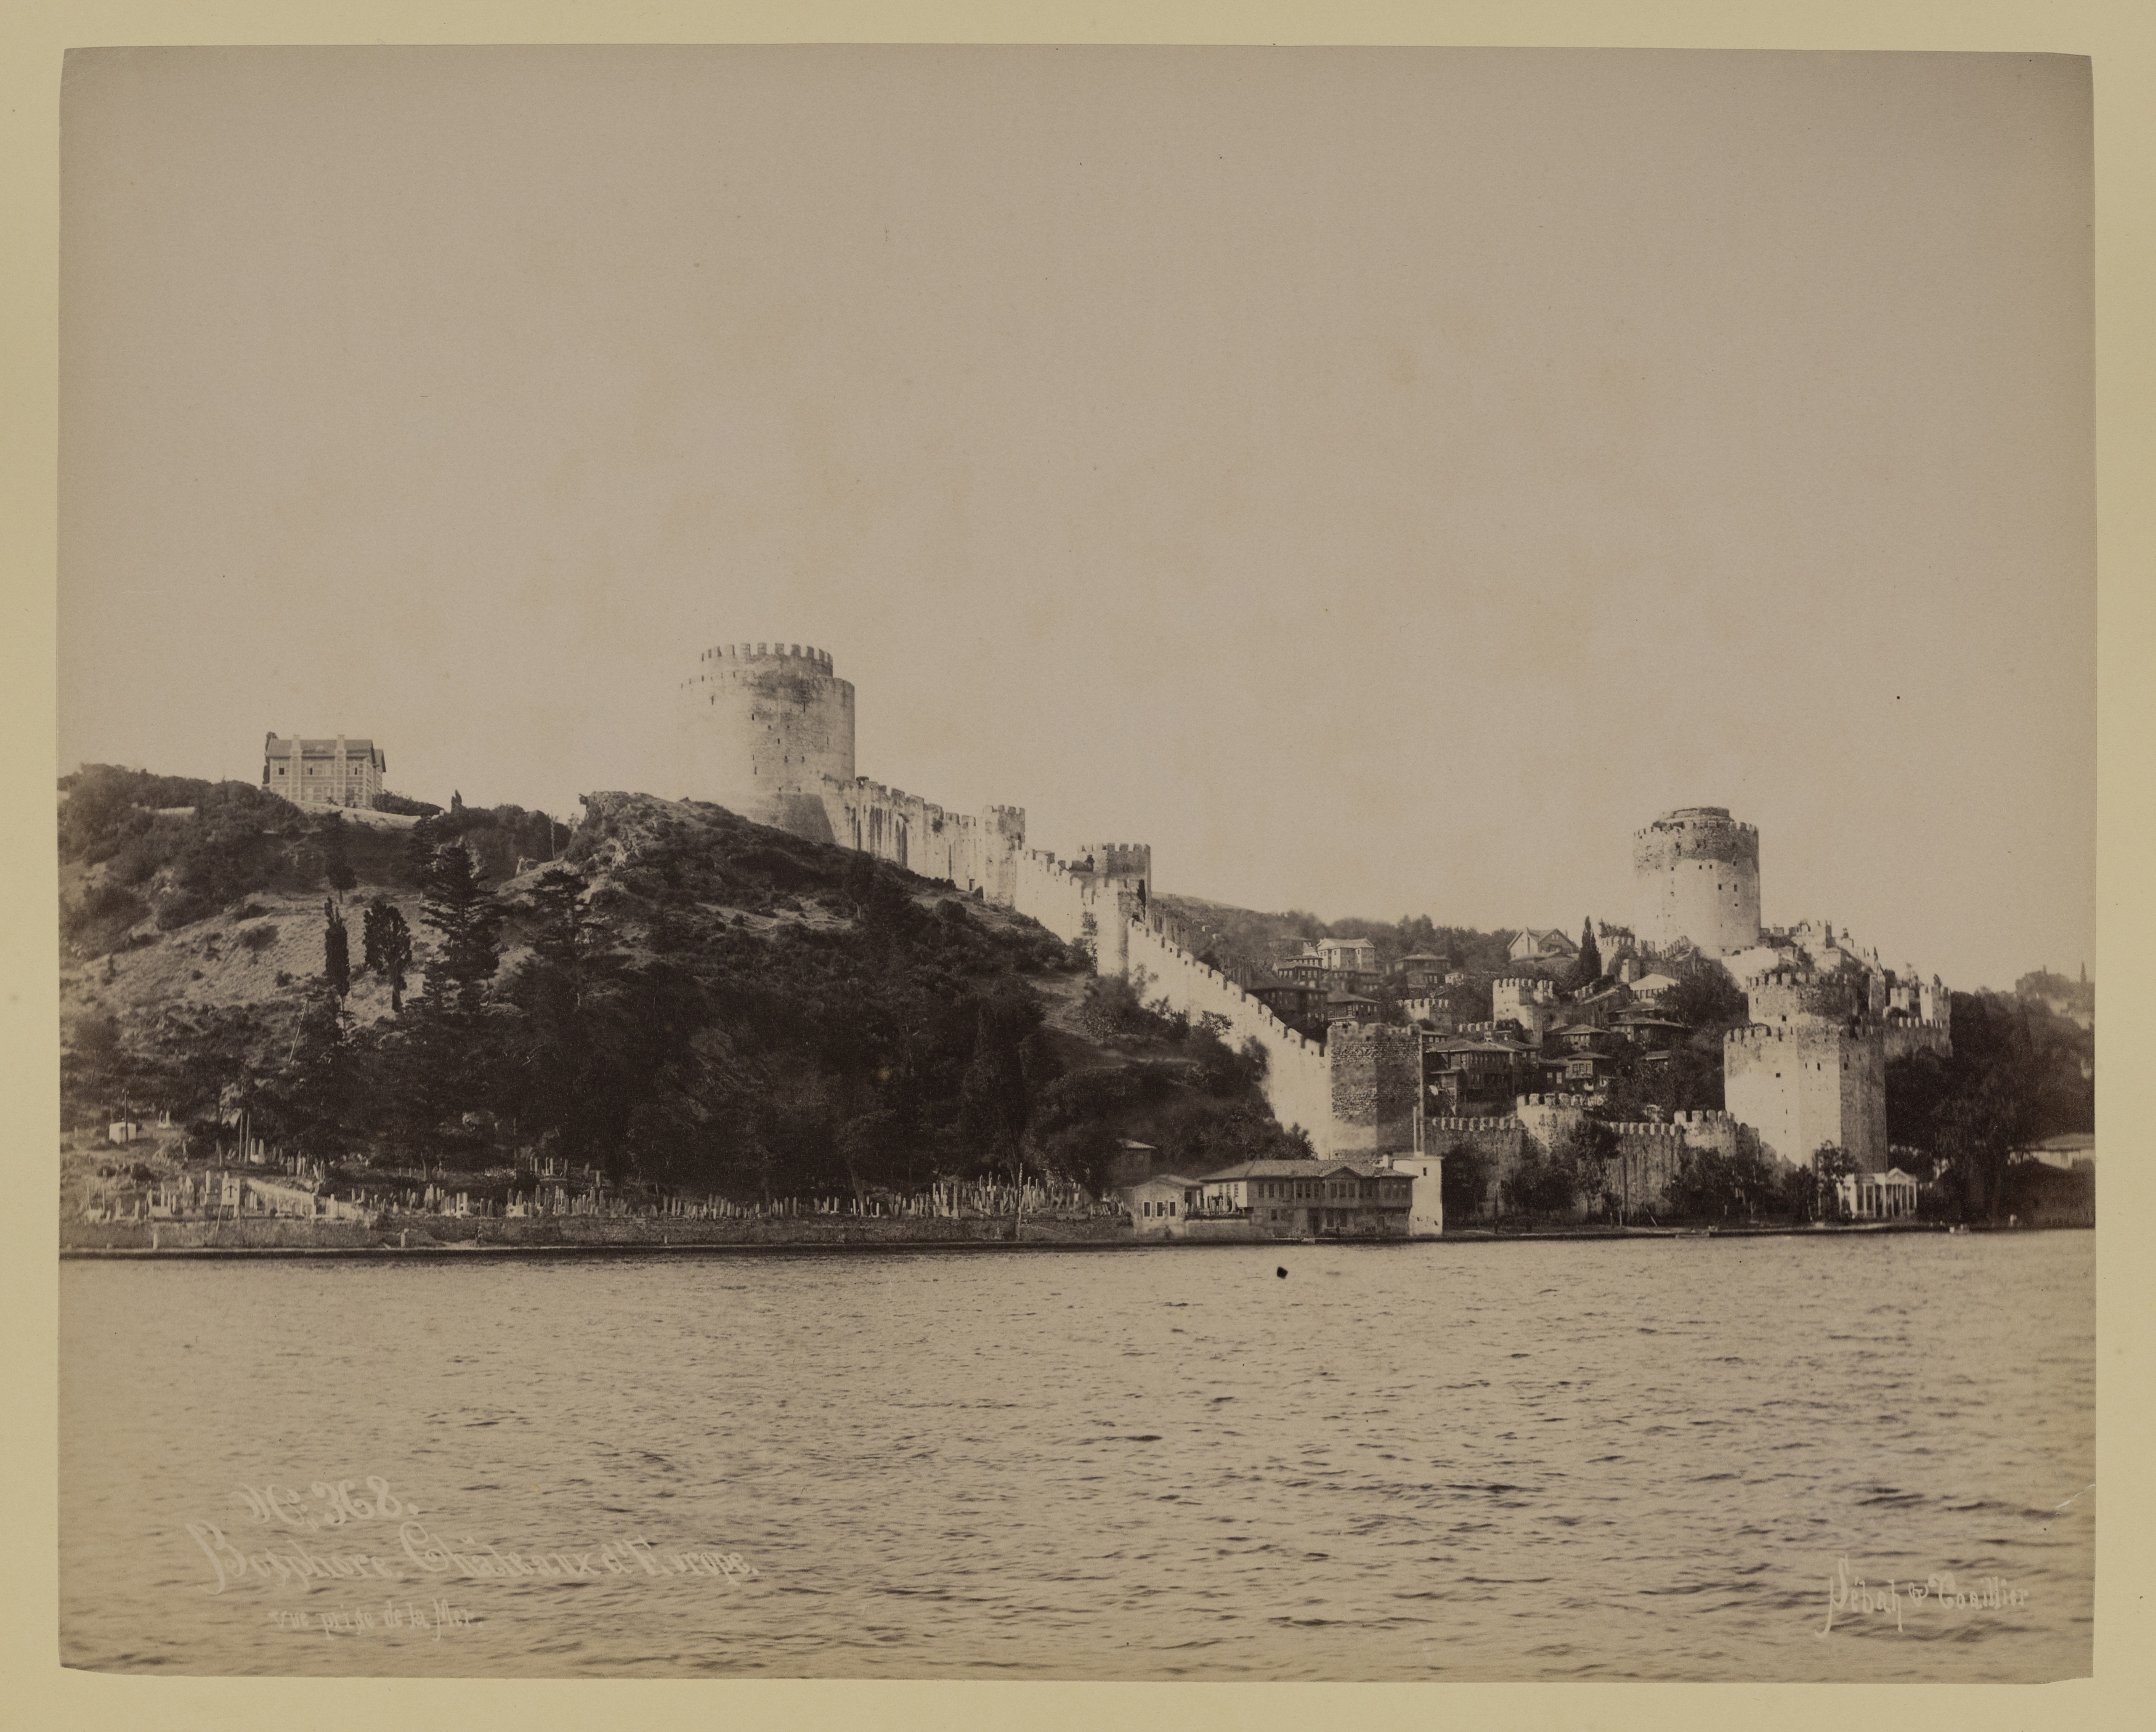 An album of silver prints of views of the Middle East, Late 19th century/first half 20th century... - Image 3 of 8